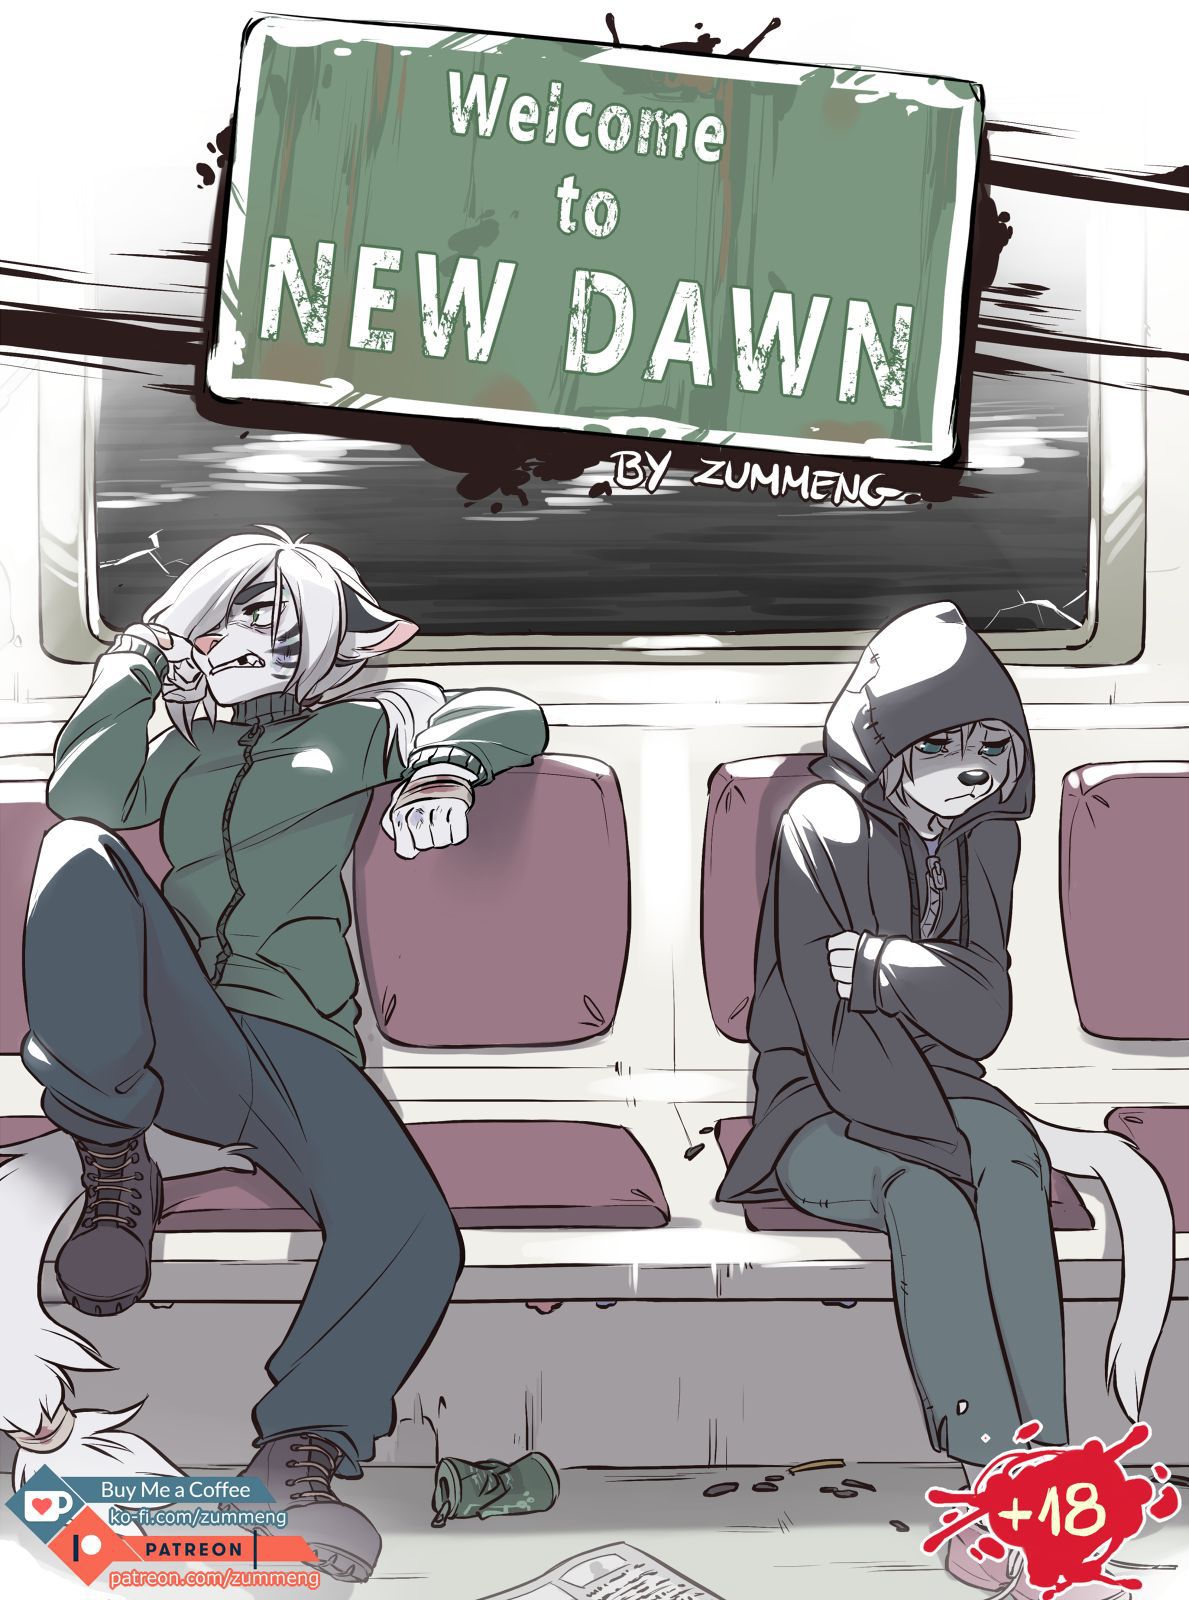 [Zummeng] Welcome to New Dawn [English] (Ongoing) 1